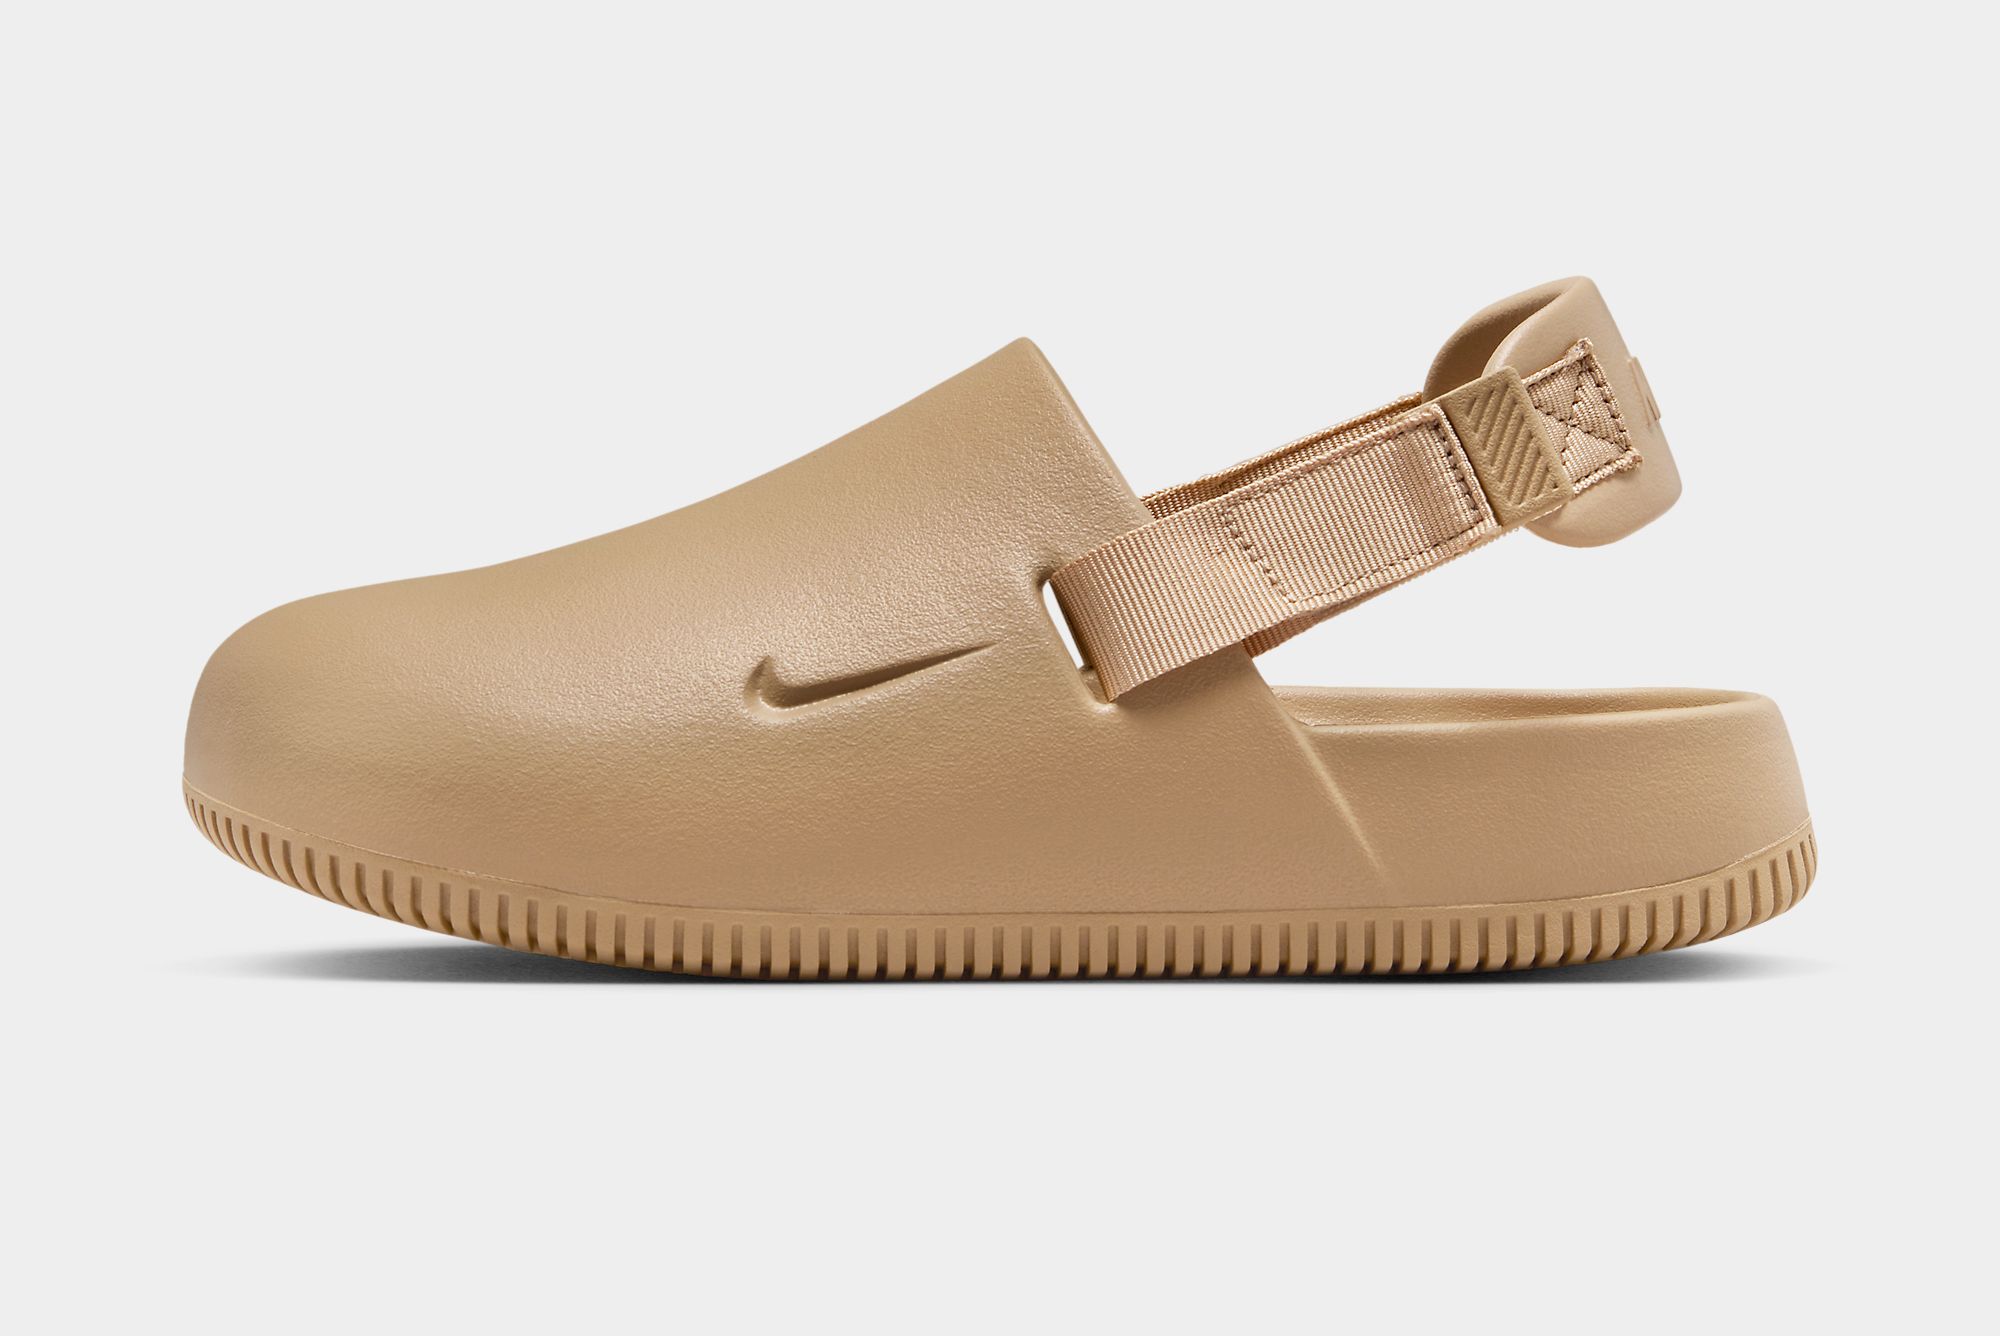 Nike Calm Mule to Come in Four Colours - Sneaker Freaker